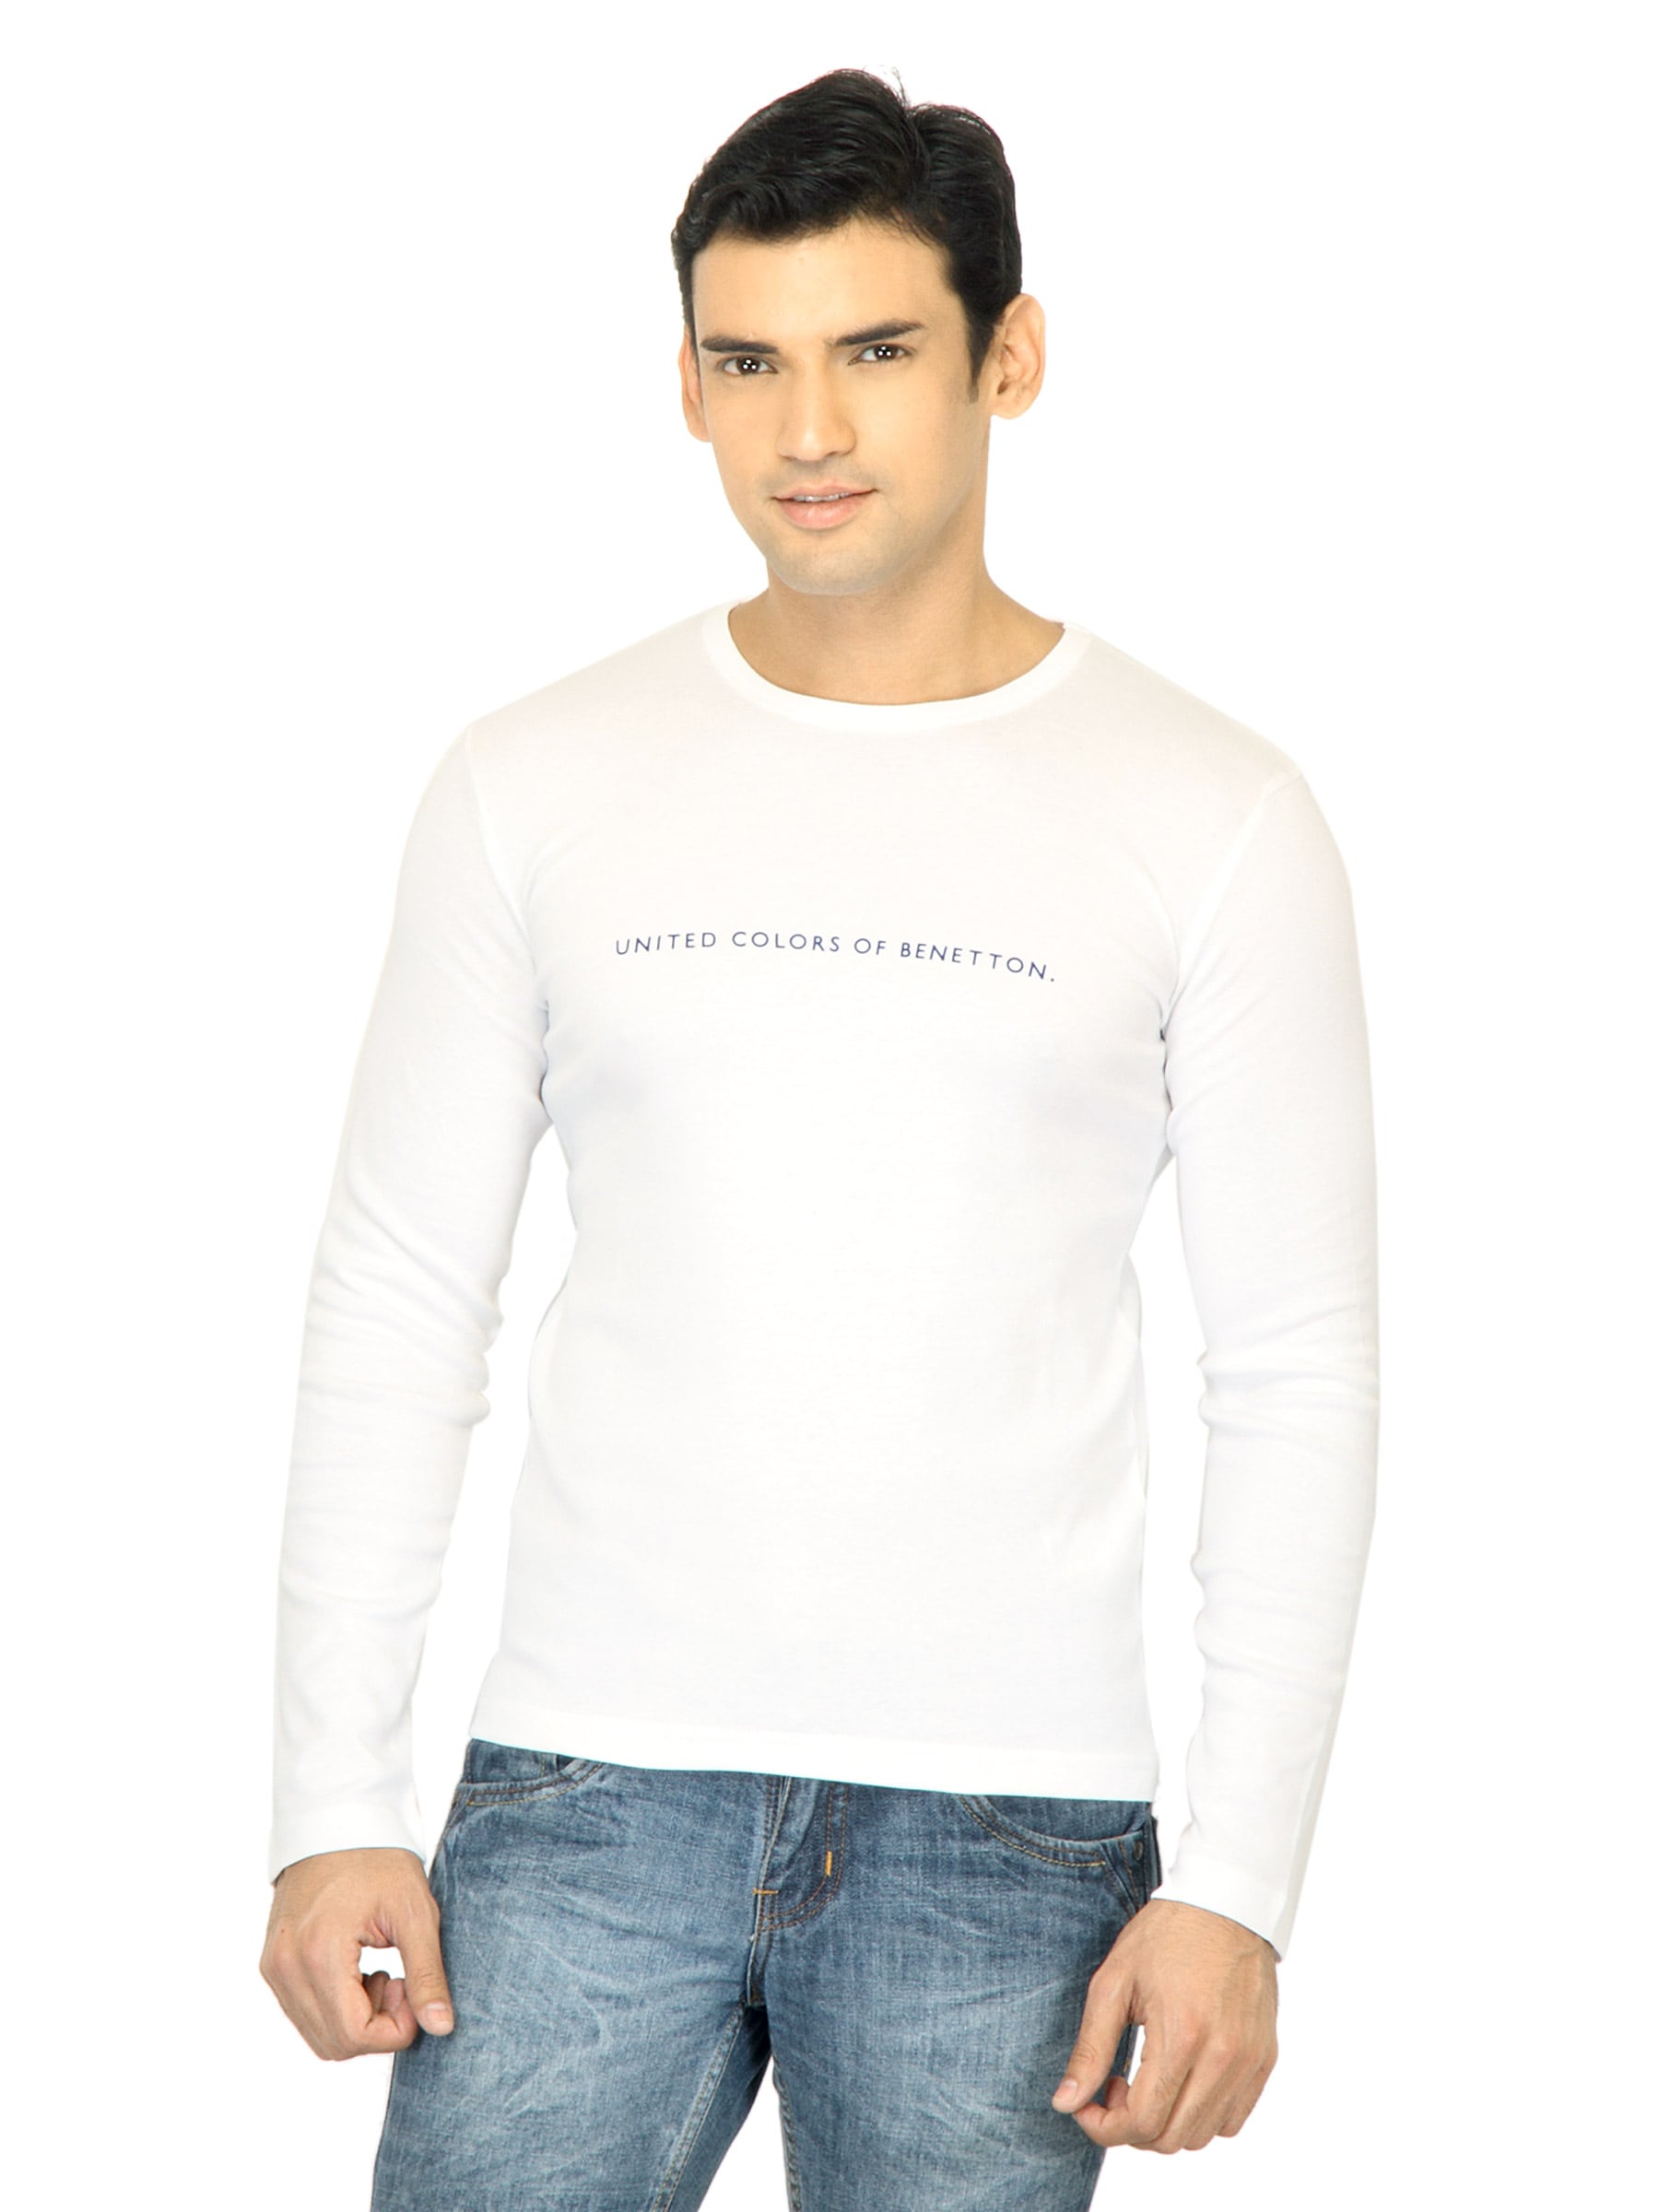 United Colors of Benetton Men Solid White Tshirt